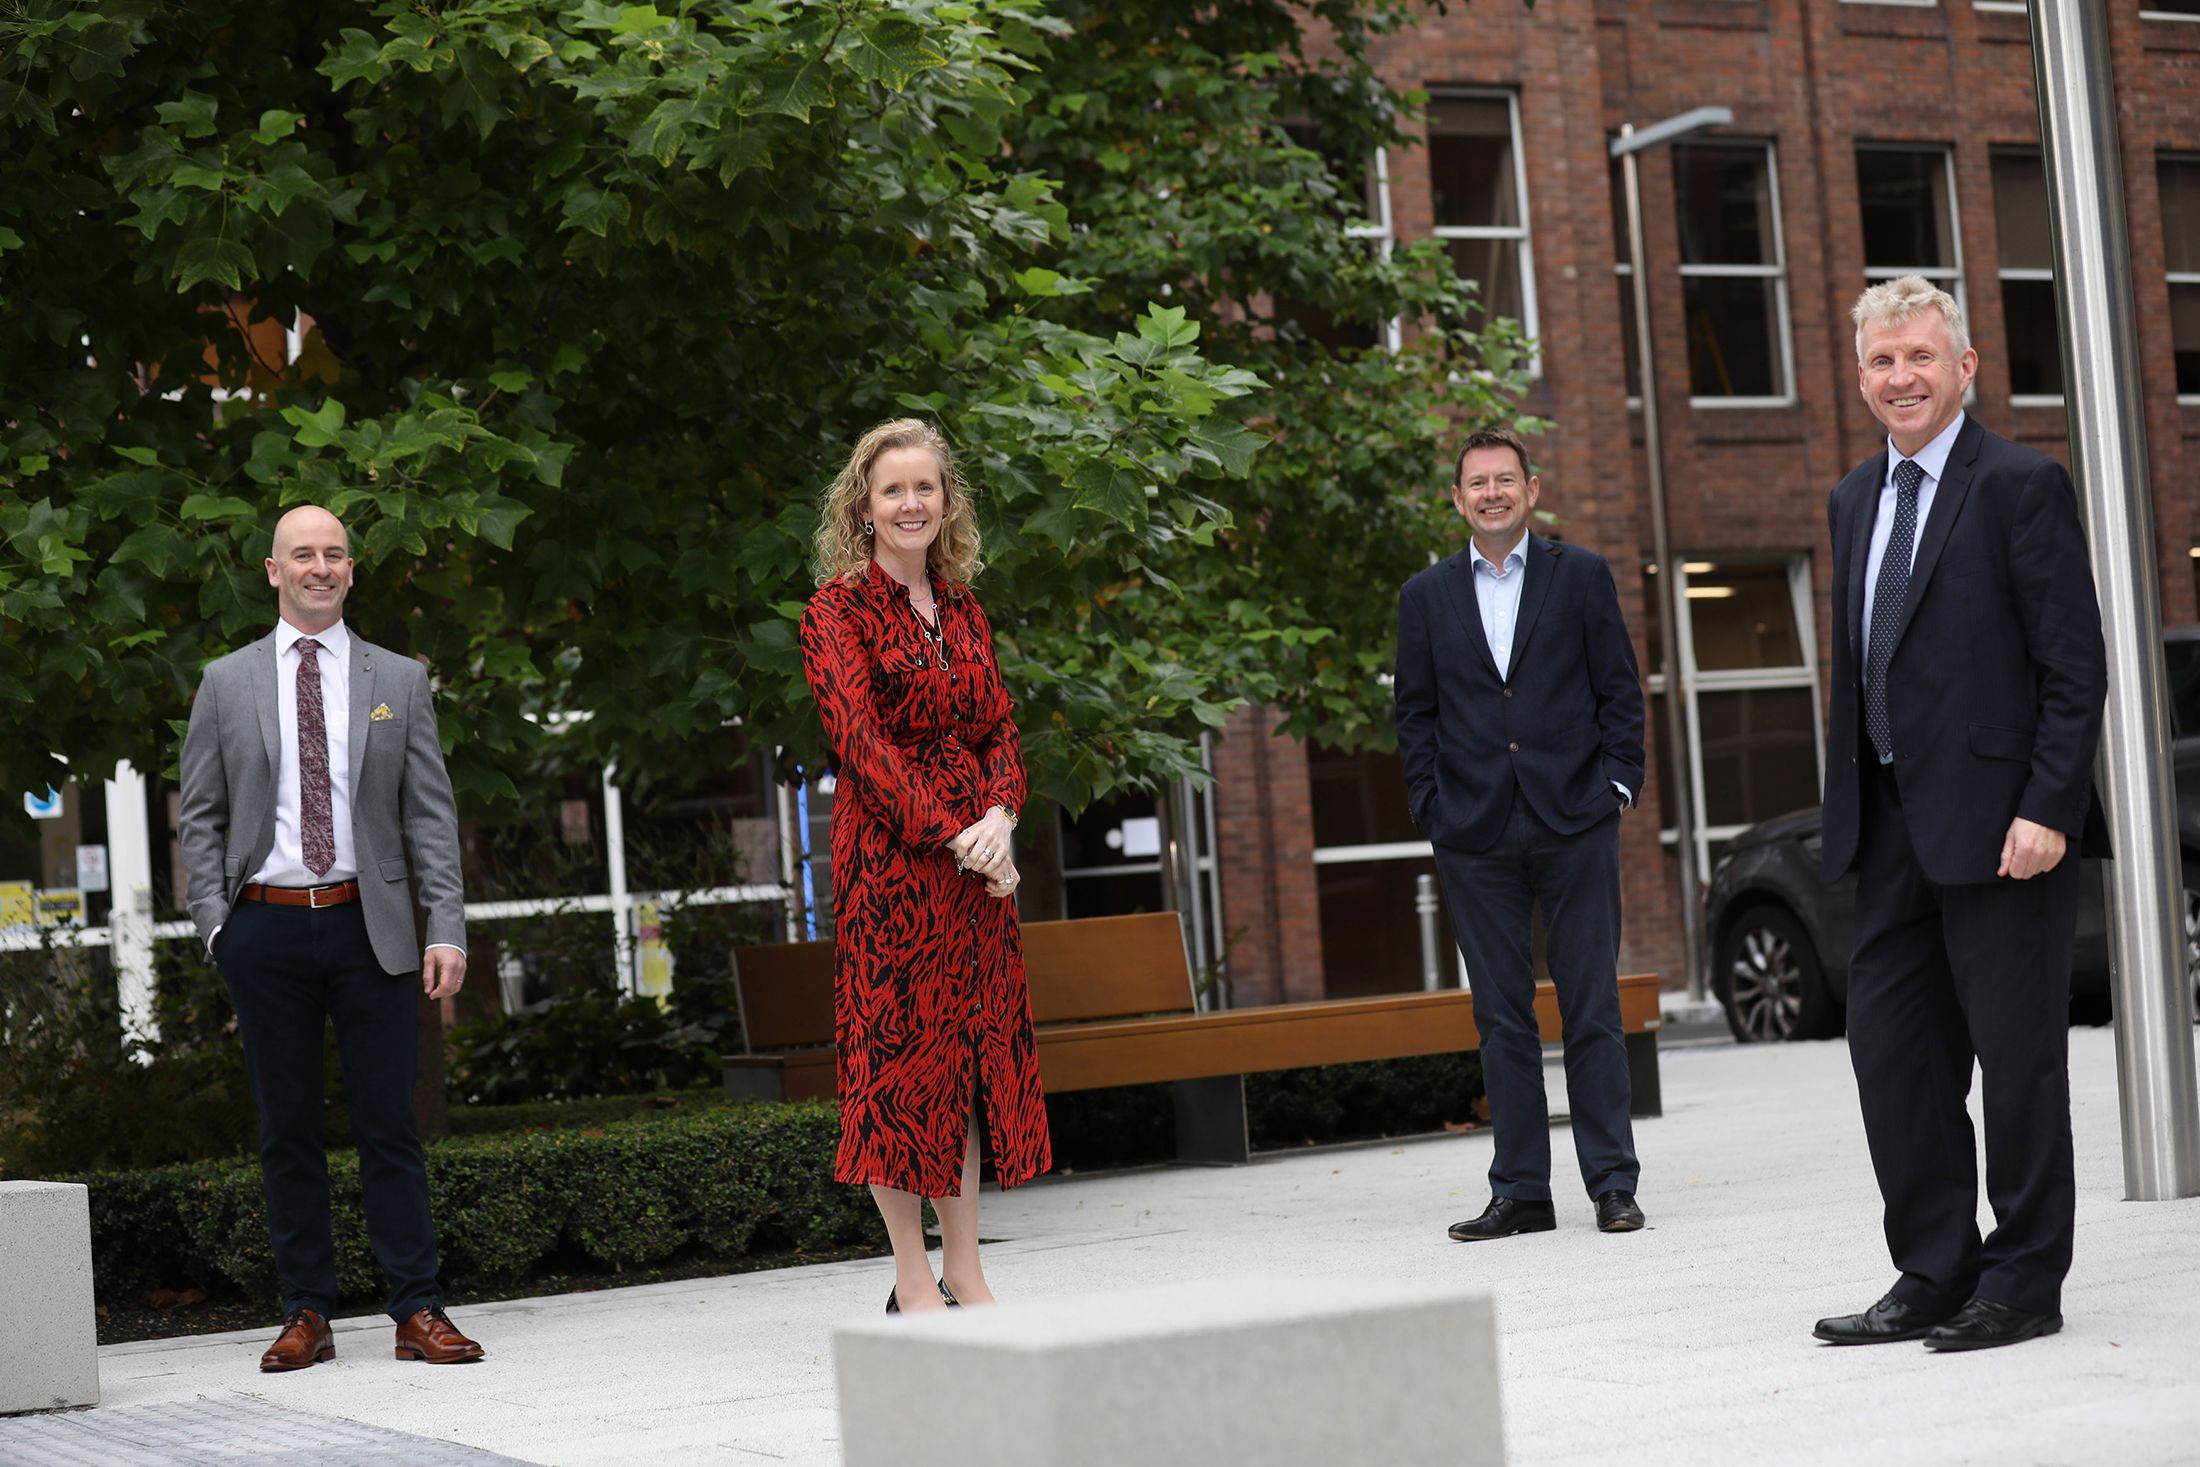 Pictured at the announcement of KPMG’s acquisition of Future Analytics Consulting were (L to R) Stephen Purcell, Founder, Future Analytics Consulting; Michele Connolly, Partner, KPMG; Seamus Hand, Managing Partner, KPMG; and Professor William Hynes, Founder, Future Analytics Consulting. 